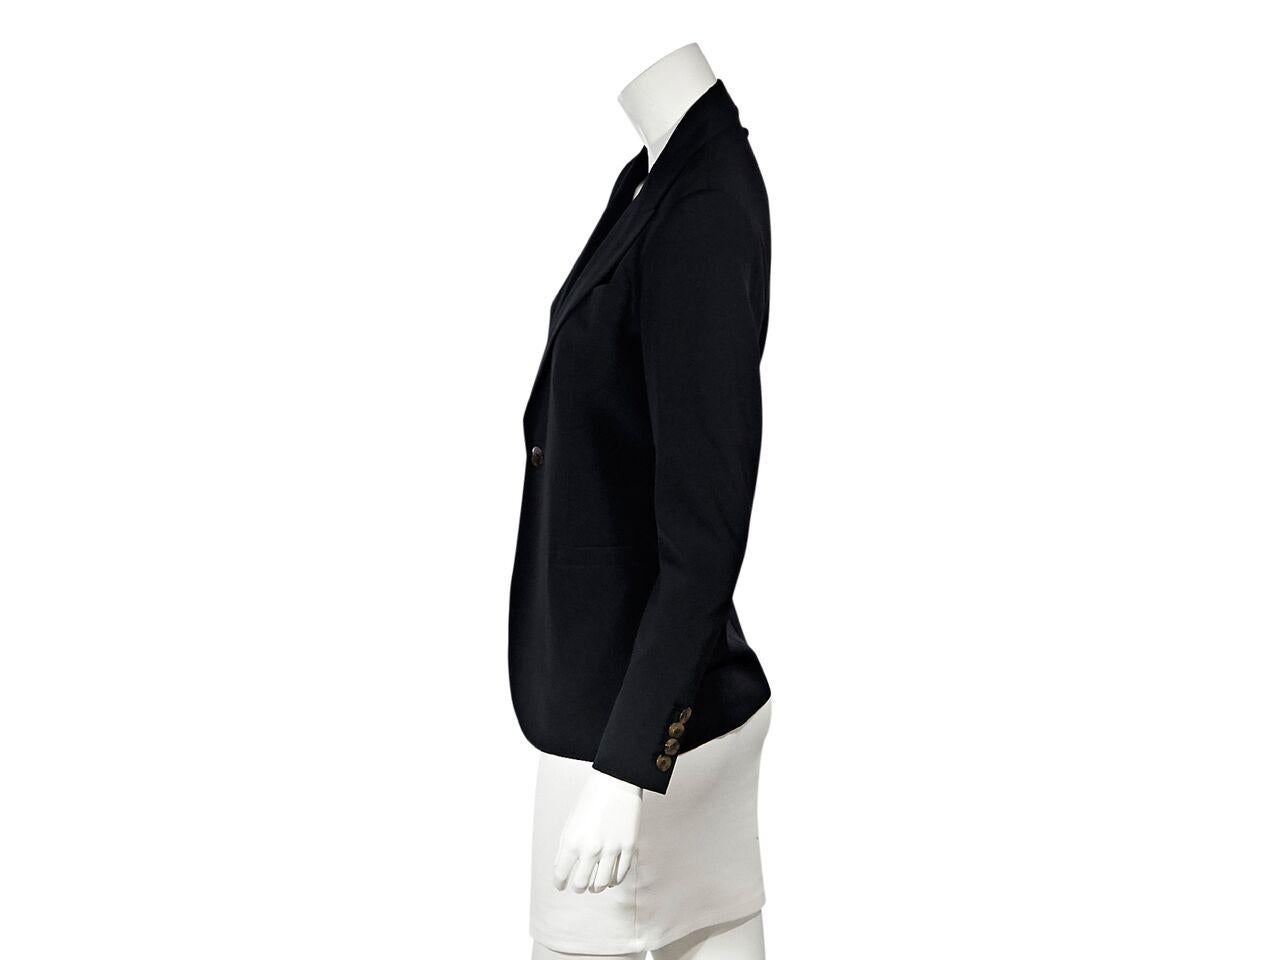 Product details:  Vintage black virgin wool blazer by Jean Paul Gaultier Femme.  Circa the 1990s.  Peak lapel.  Long sleeves.  Four-button detail at cuffs.  Chest and waist besom pockets.  34